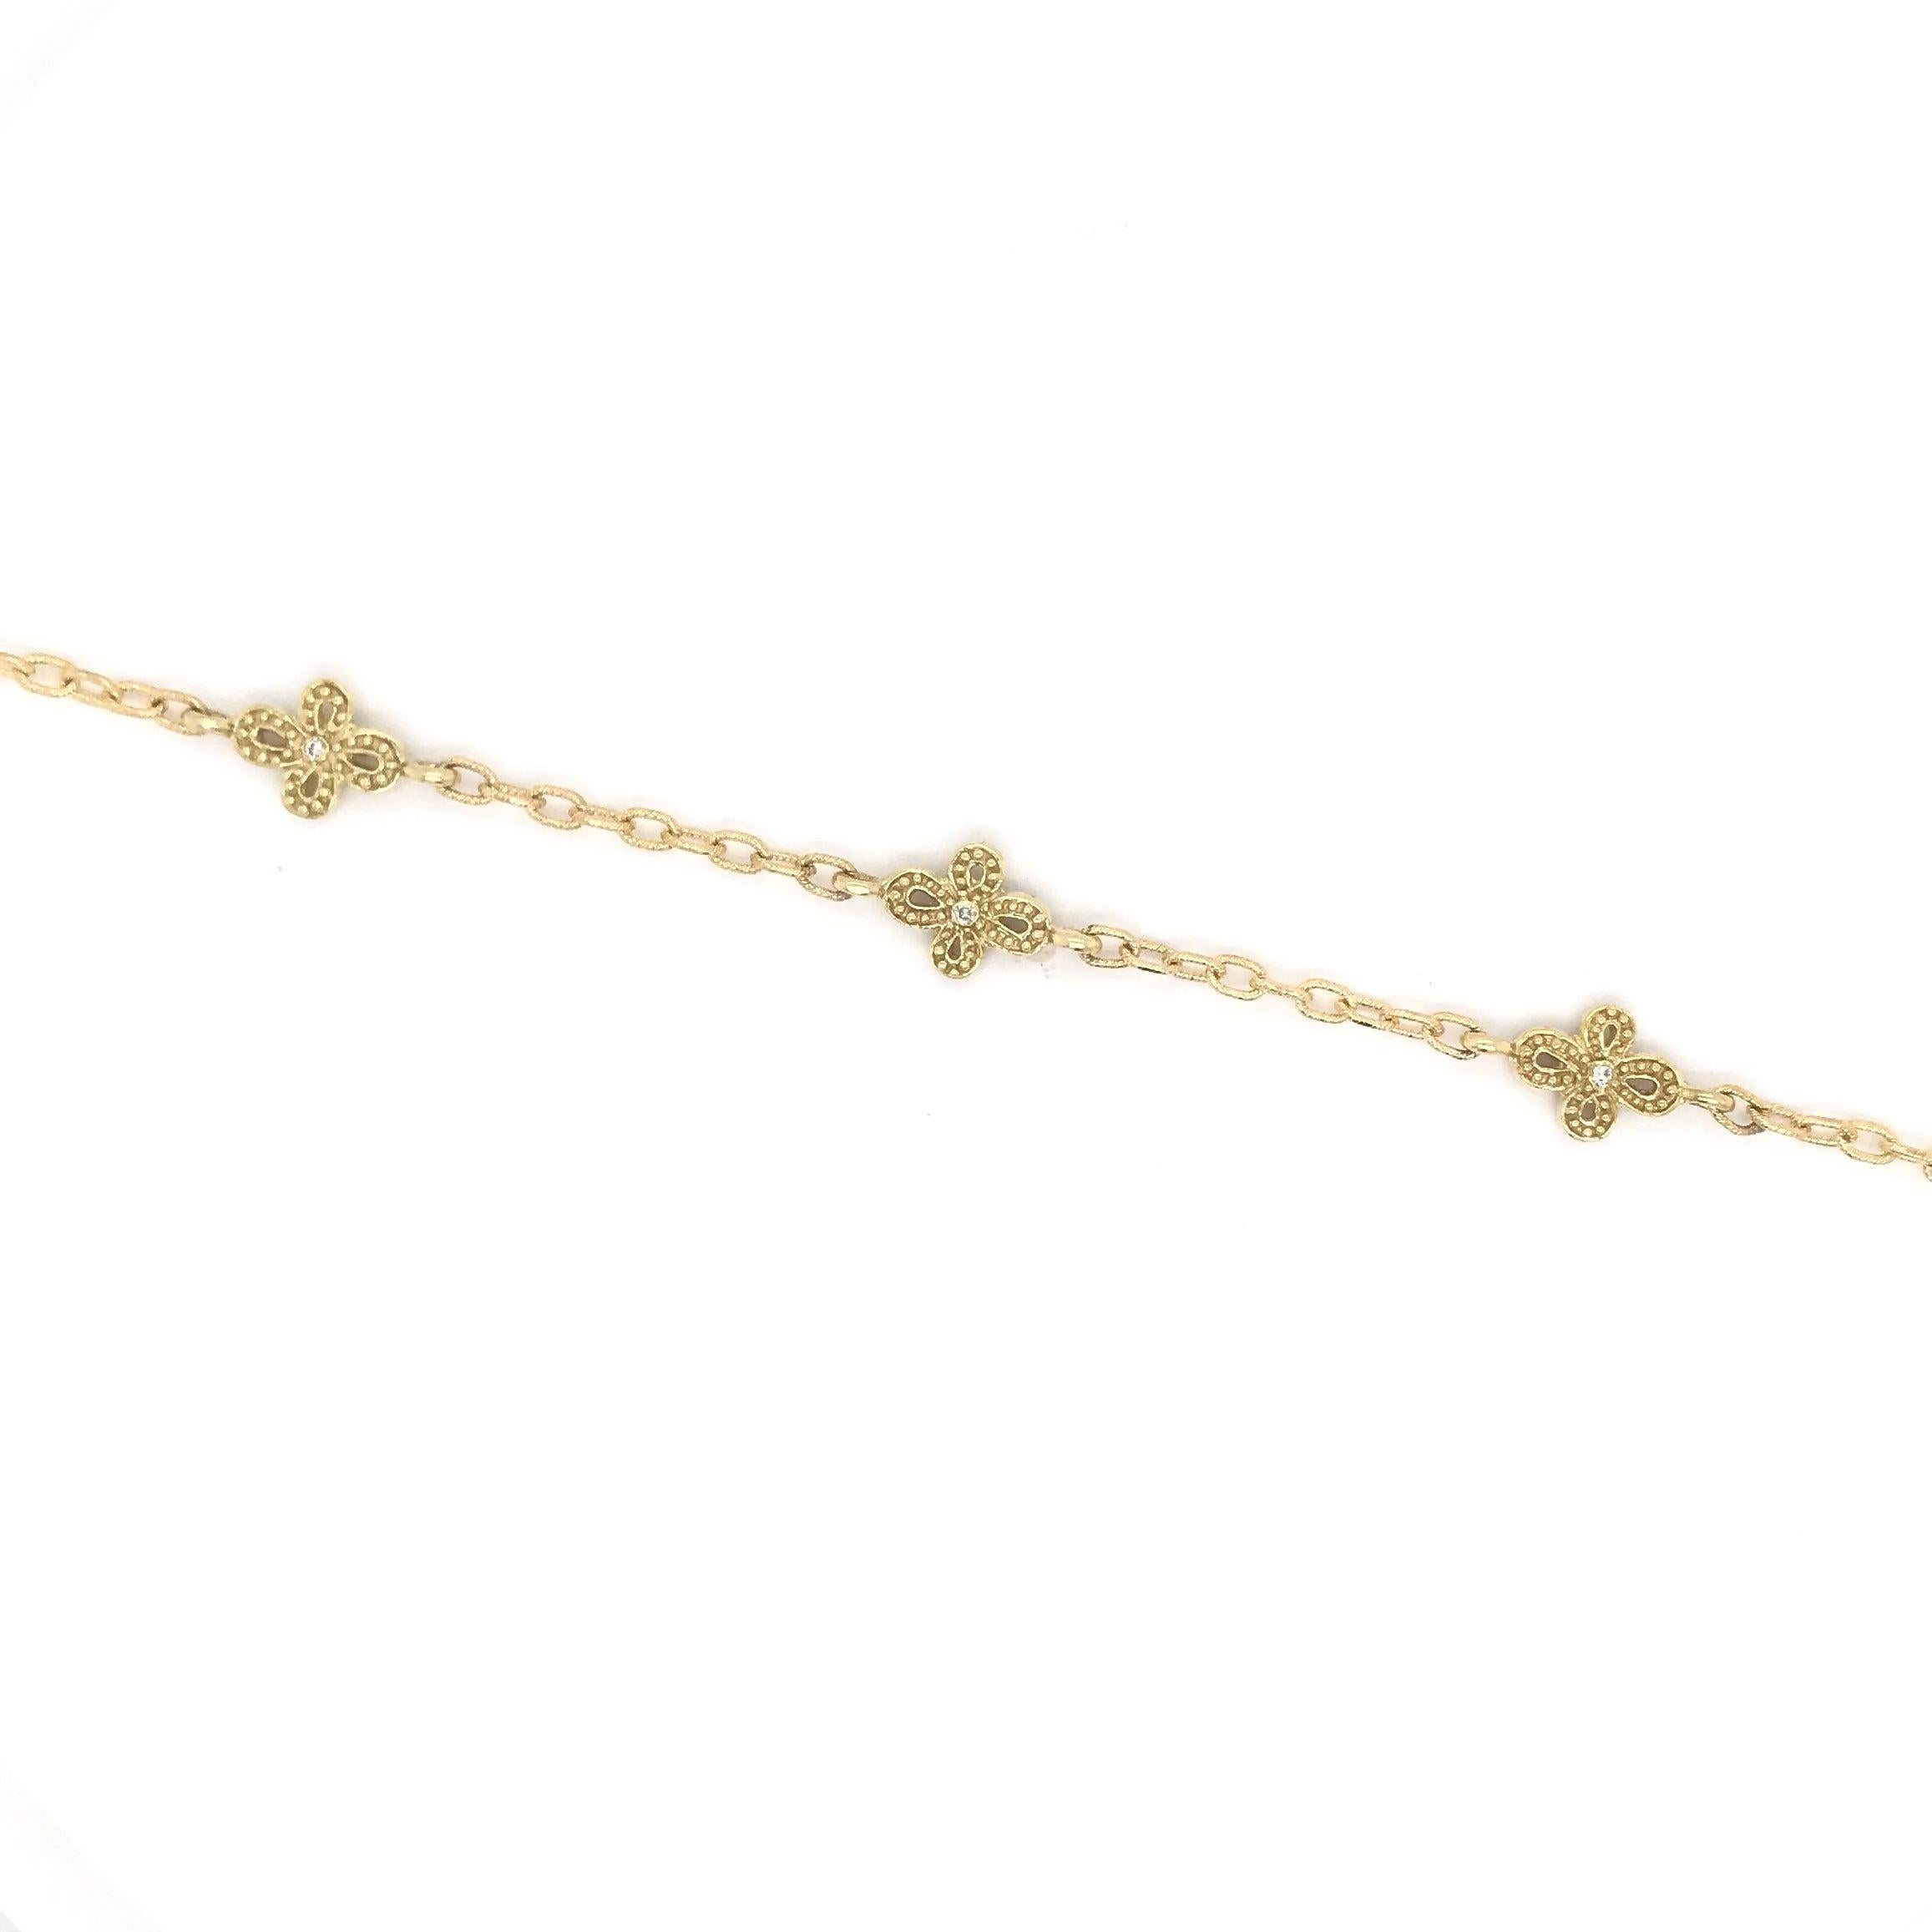 This dainty 18K gold diamond bracelet is a contemporary piece. Each of the five charms resemble a small flower with a tiny sparkling diamond in the center. The links feature fine textured details. This bracelet currently measures approximately 8